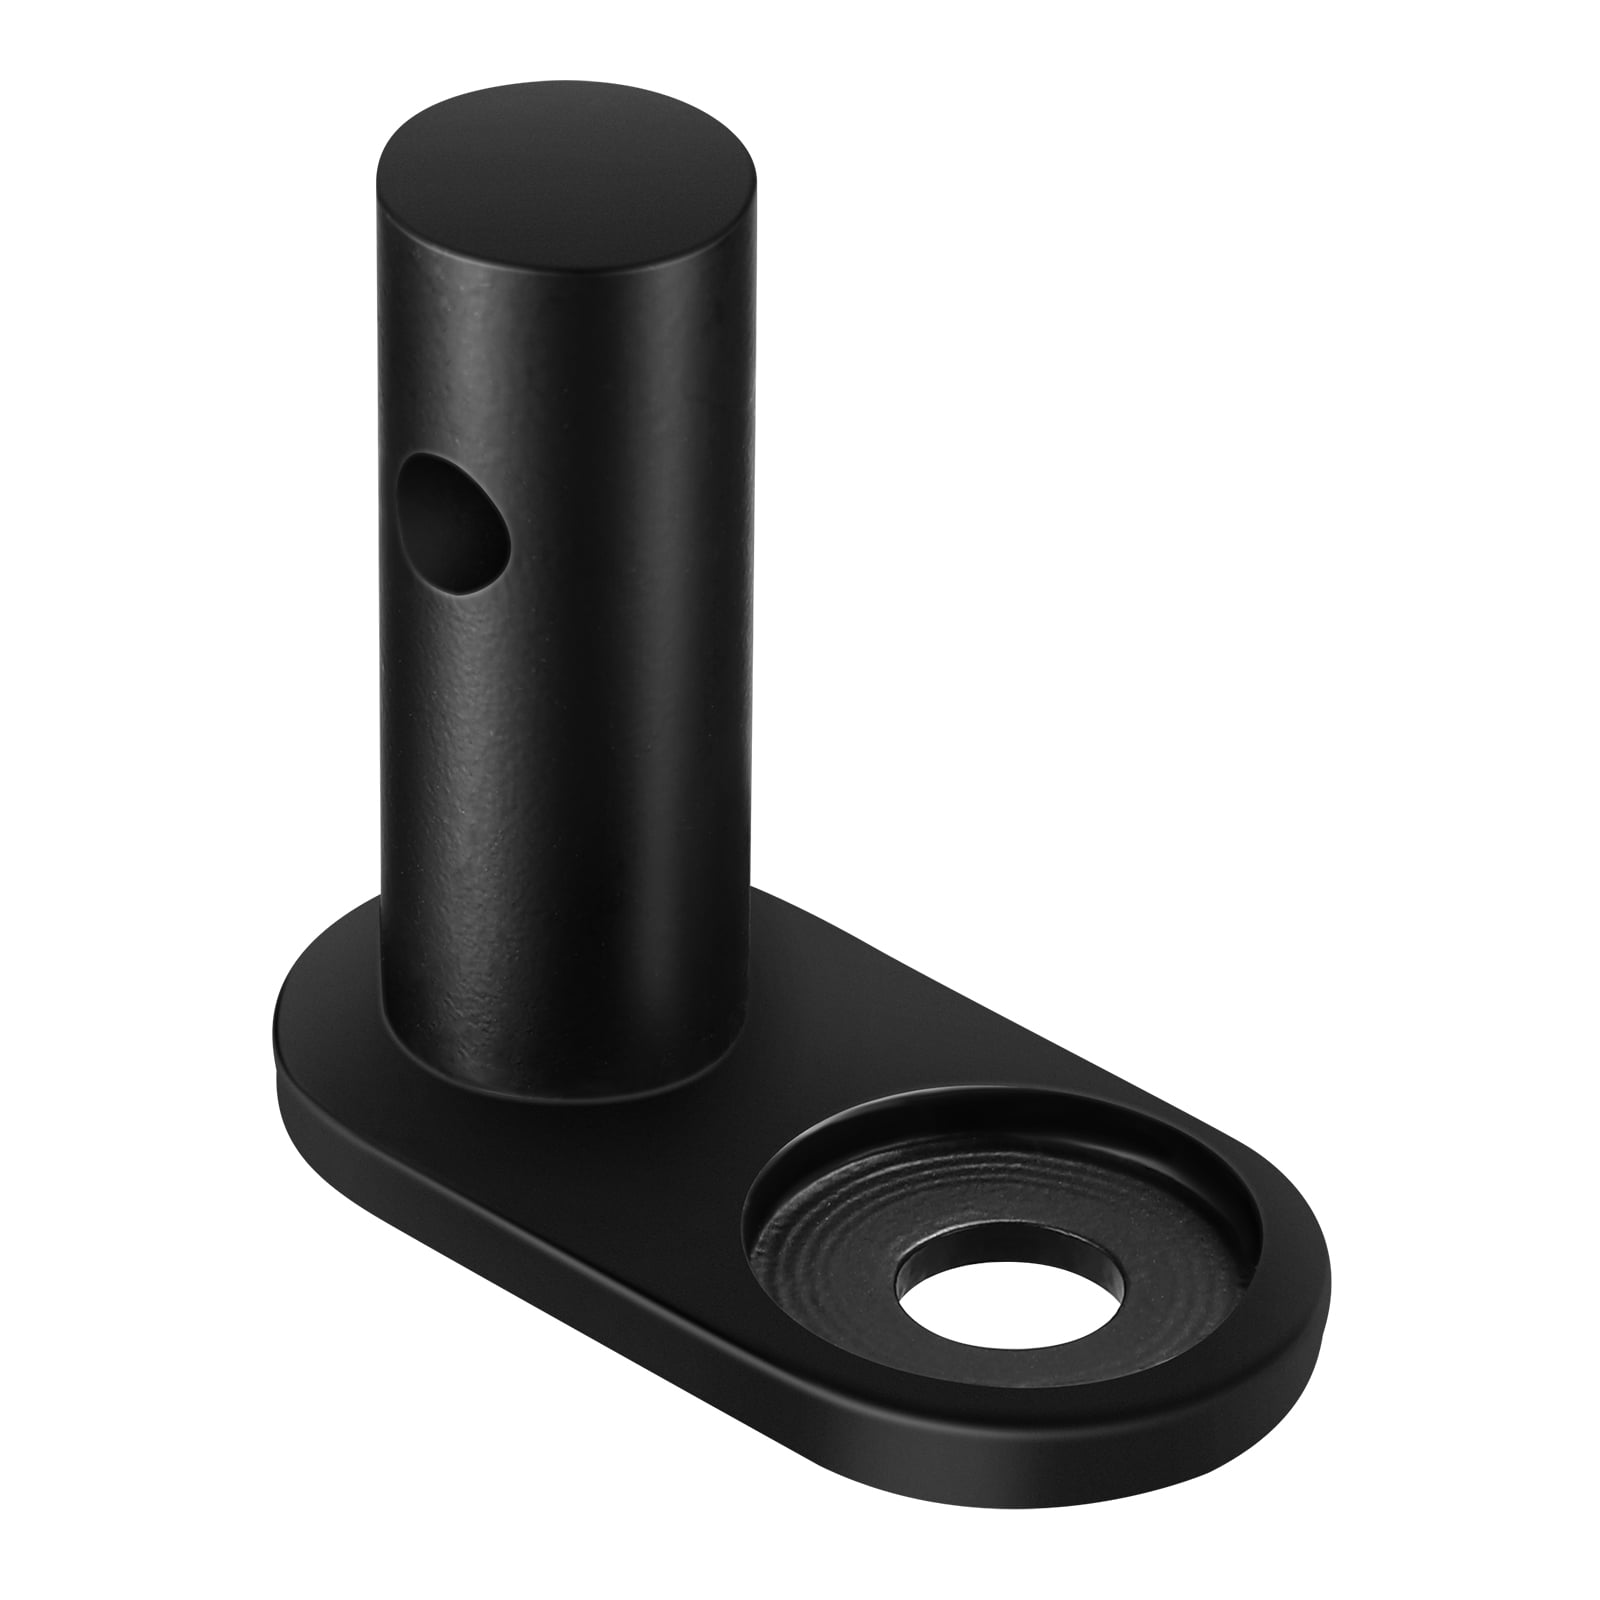 Biange Bike Trailer Hitch Connector, Cycling Adapter Accessories (Black)